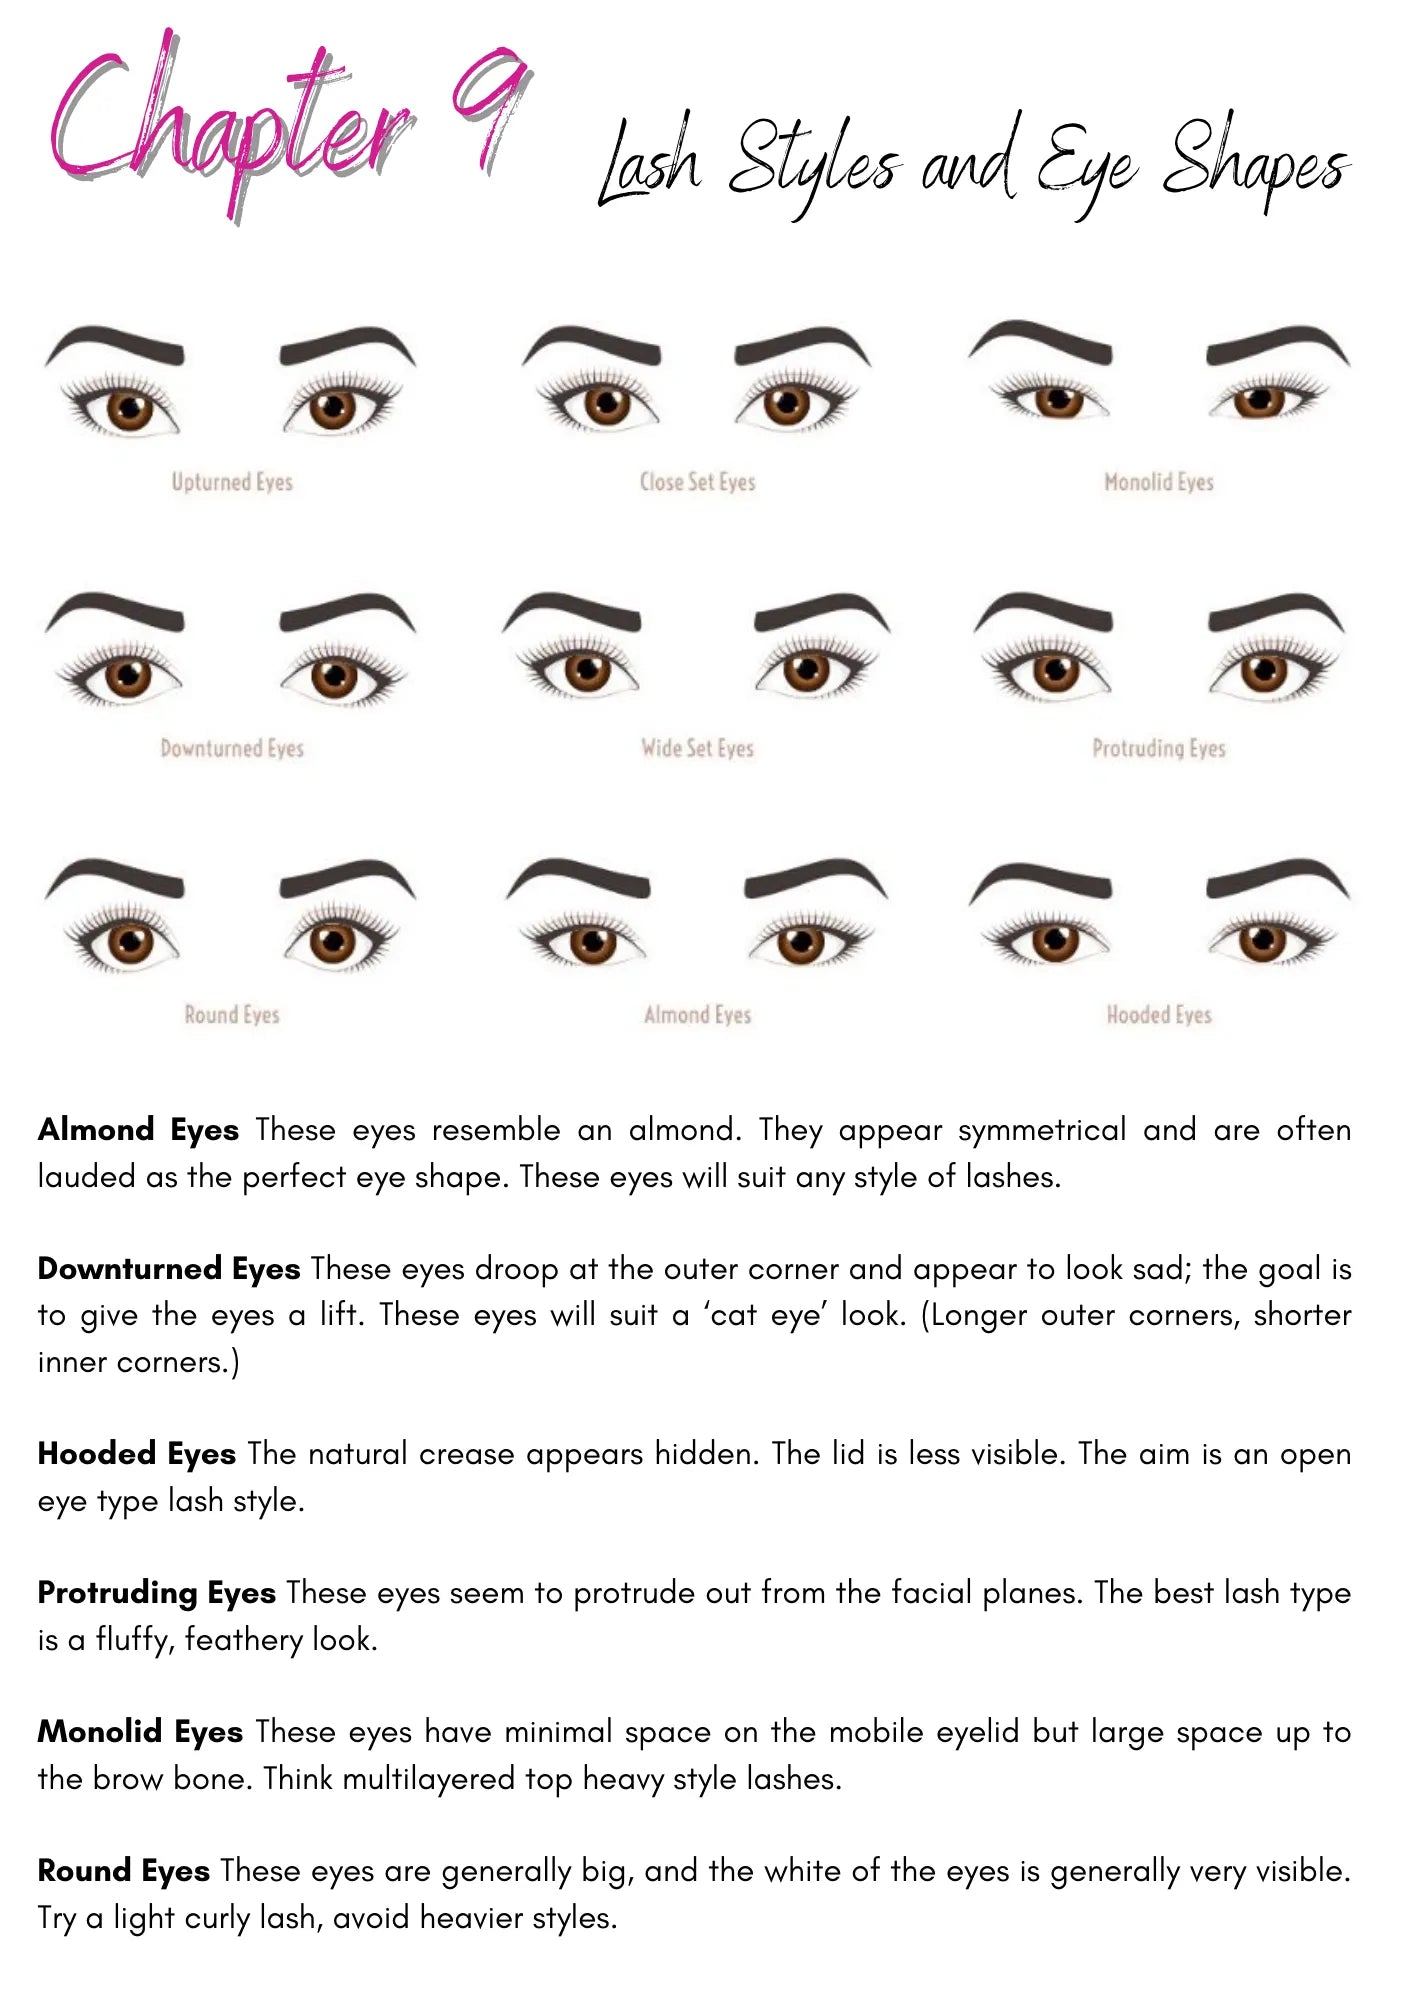 Online lash extension course Lash Styles and Eyeshapes